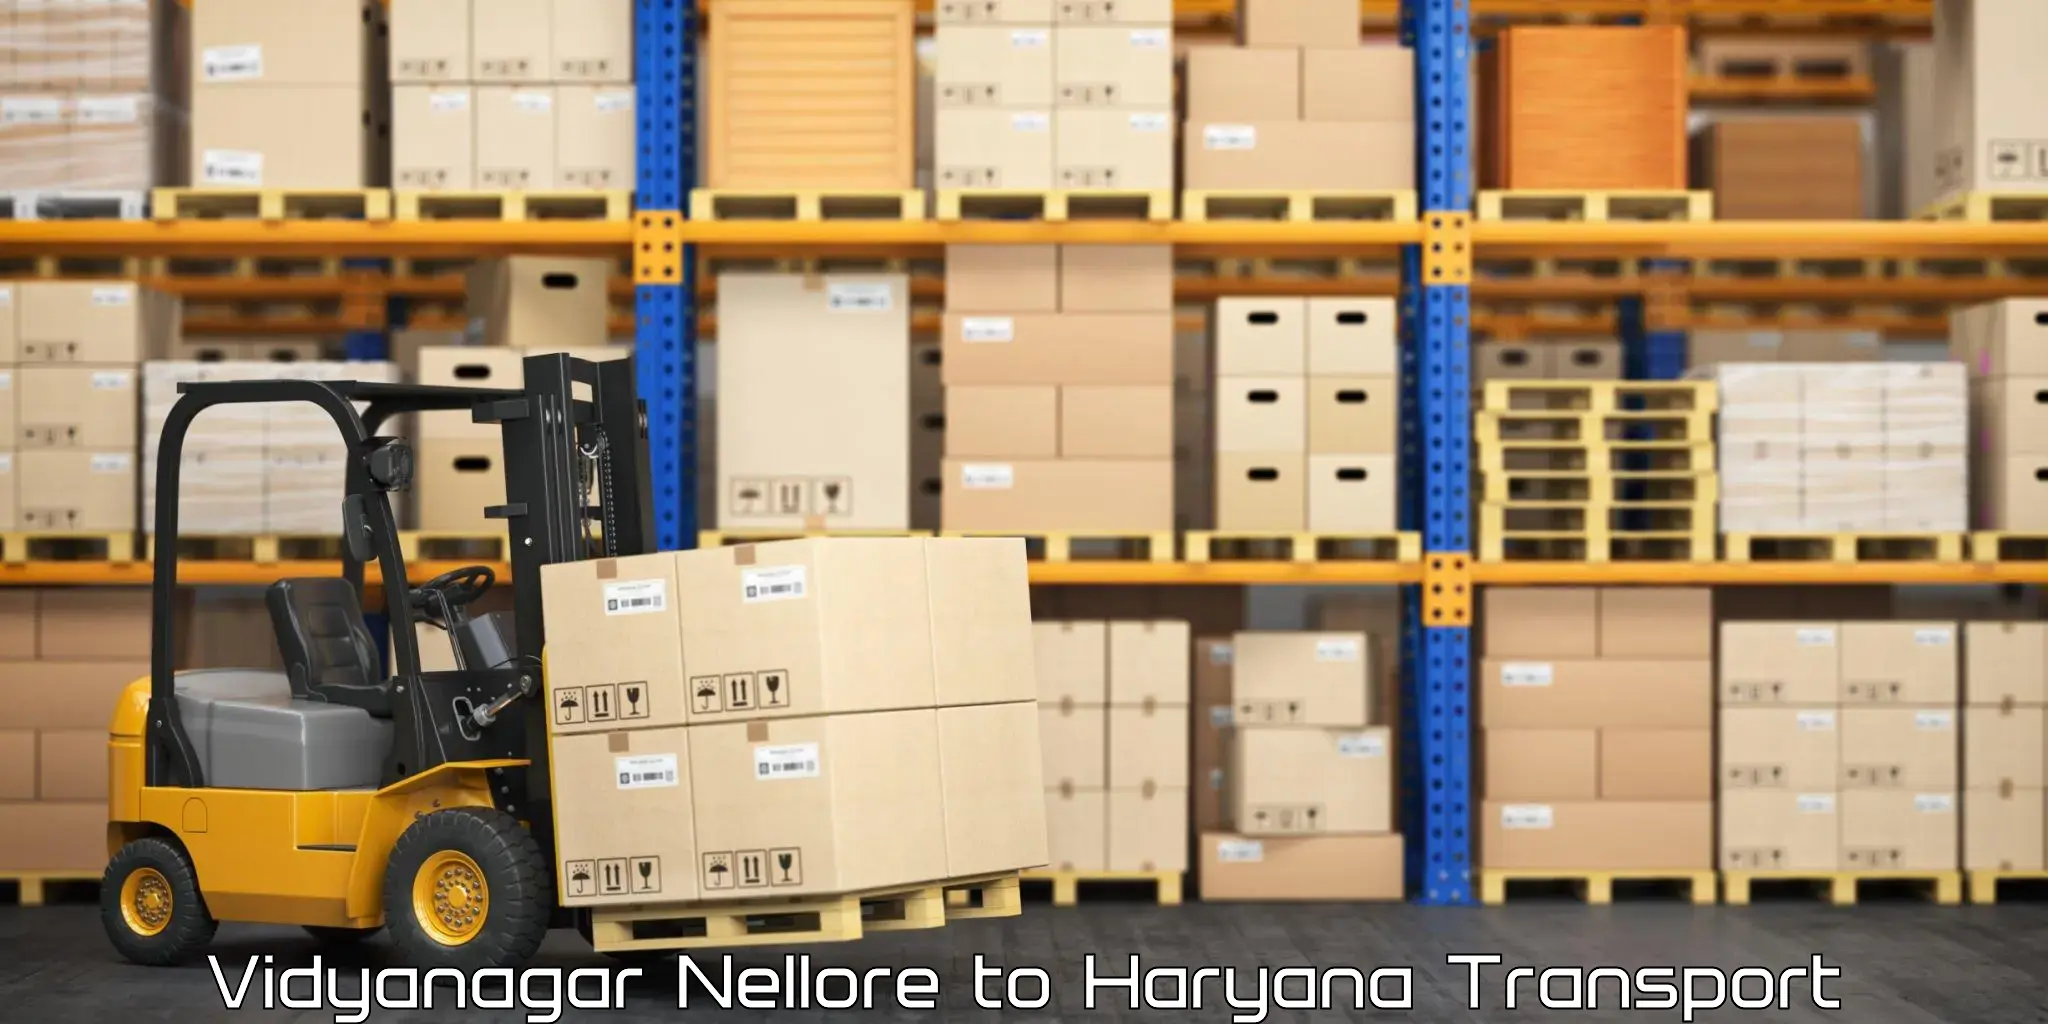 Container transport service in Vidyanagar Nellore to NCR Haryana